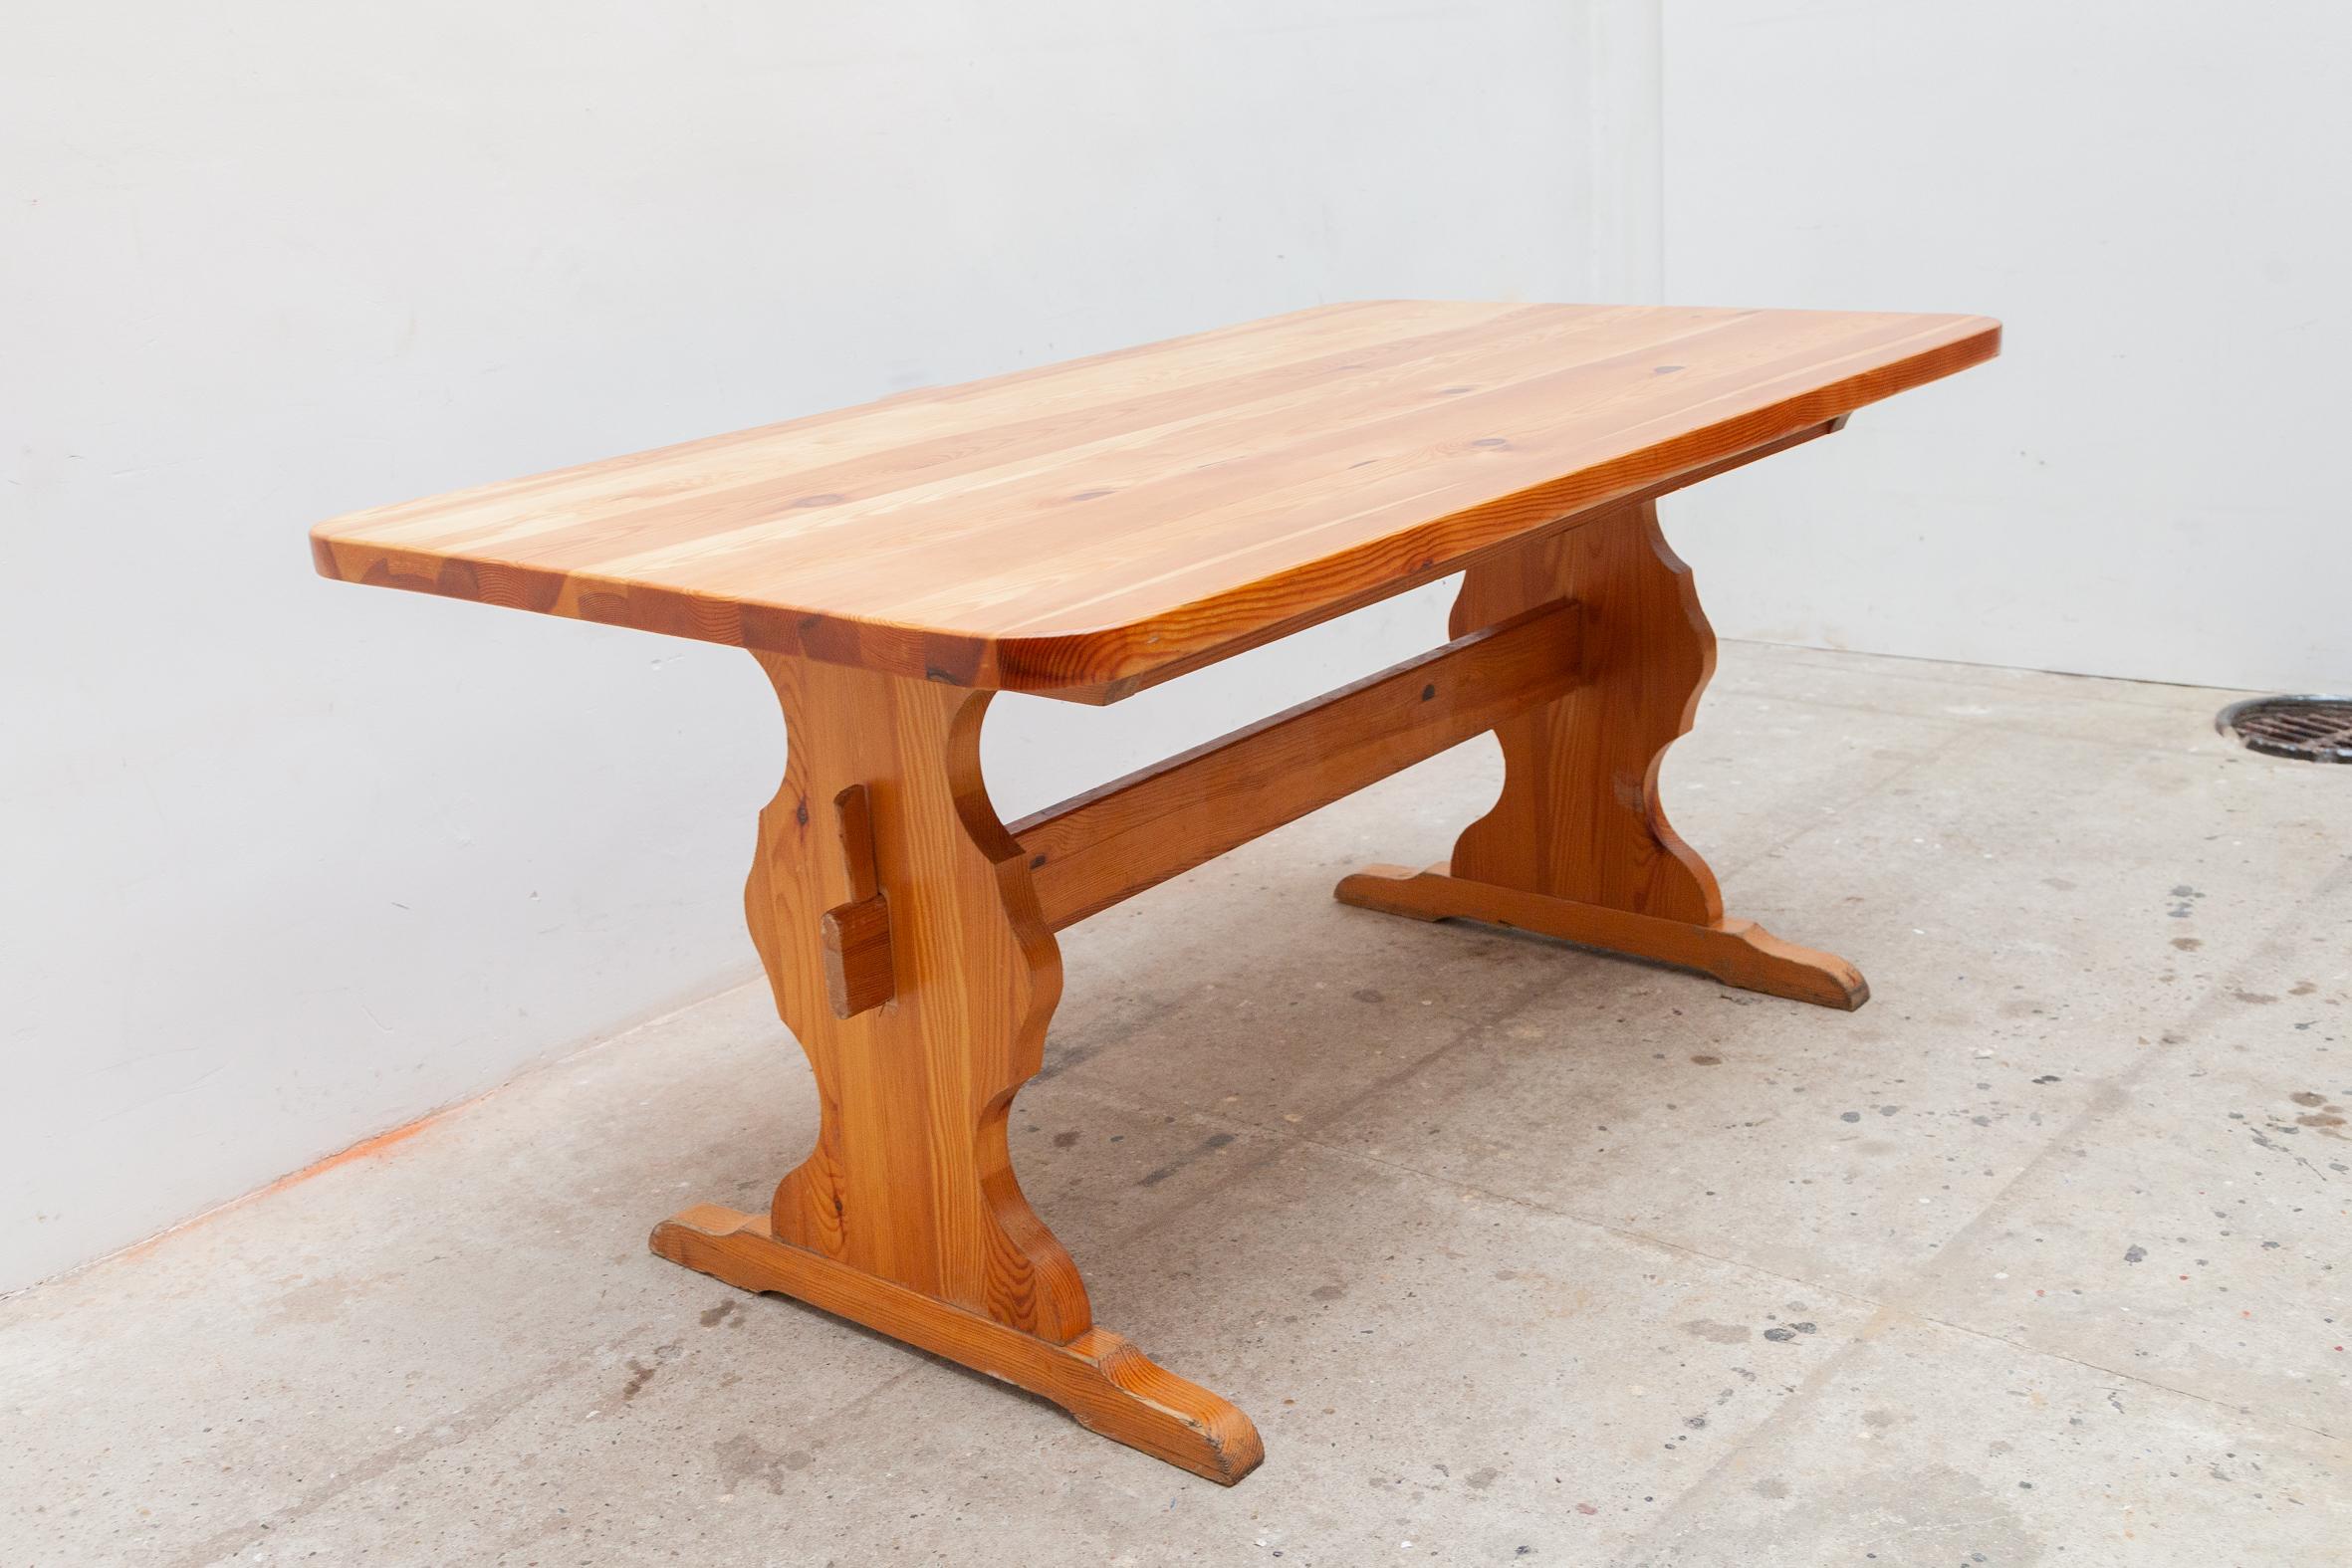 Solid pine wood dining table in the style of Charlotte Perriand. Made in Belgium in the early 60's. The tables are handmade in solid pine gives them their rustic character with a beautiful patina and grain.
6 tables available, price is for 1 table.